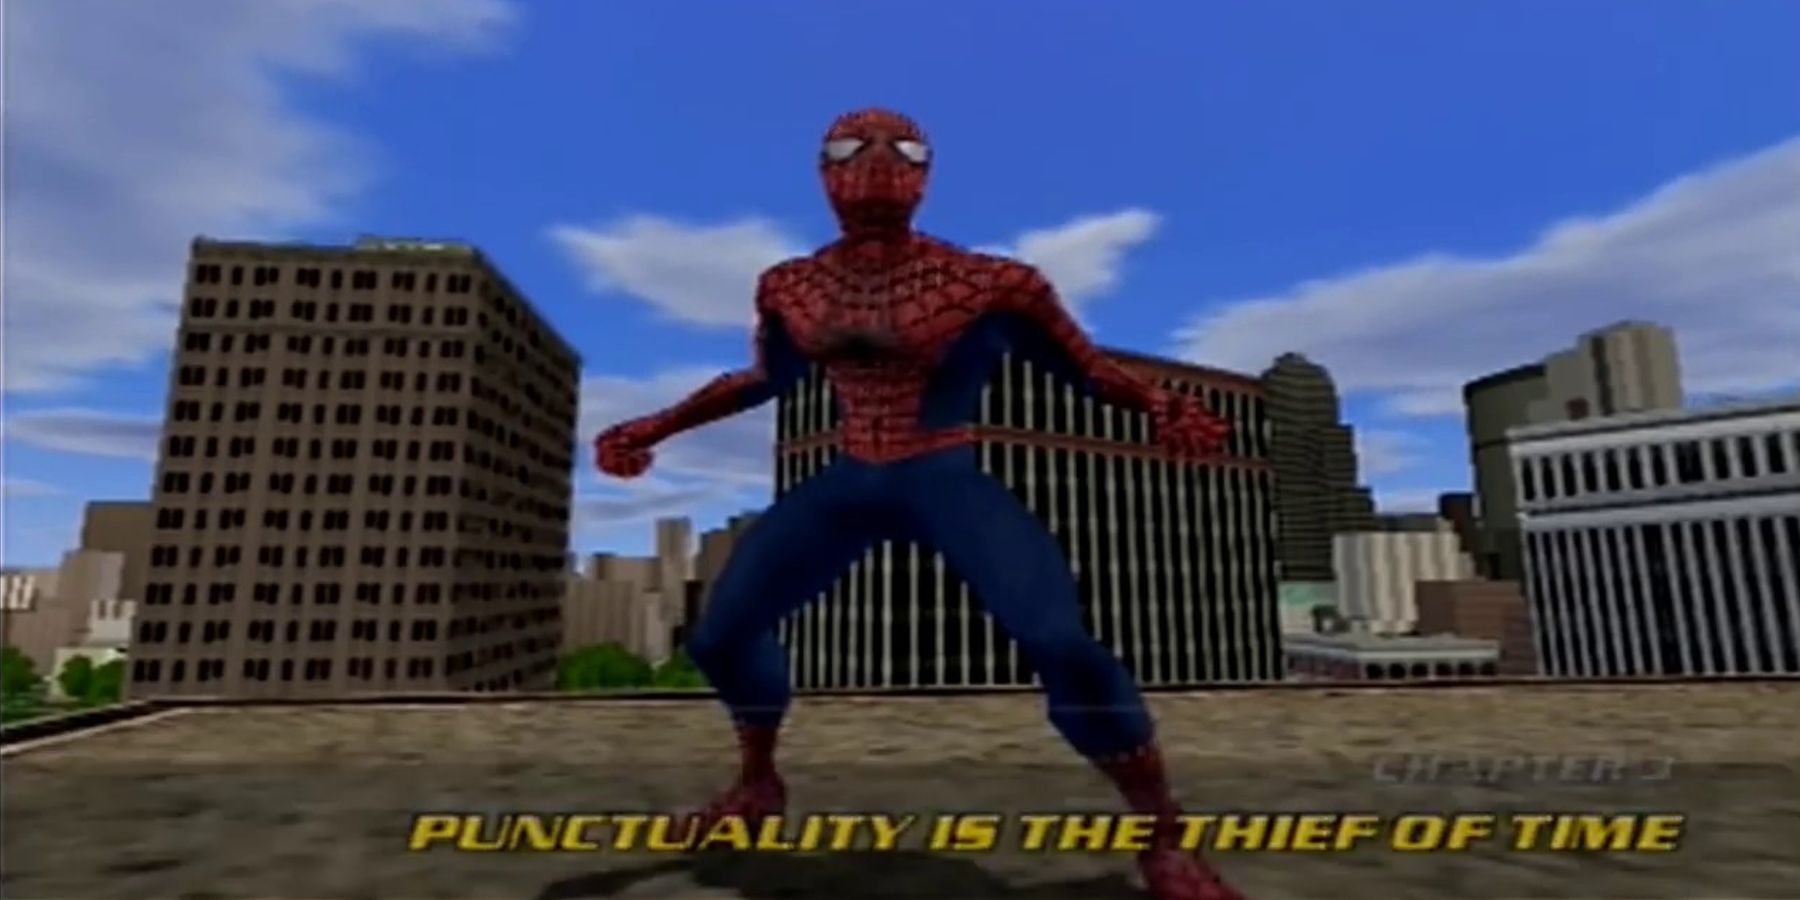 SPIDER MAN - THE MOVIEPart 2 (PS2) 